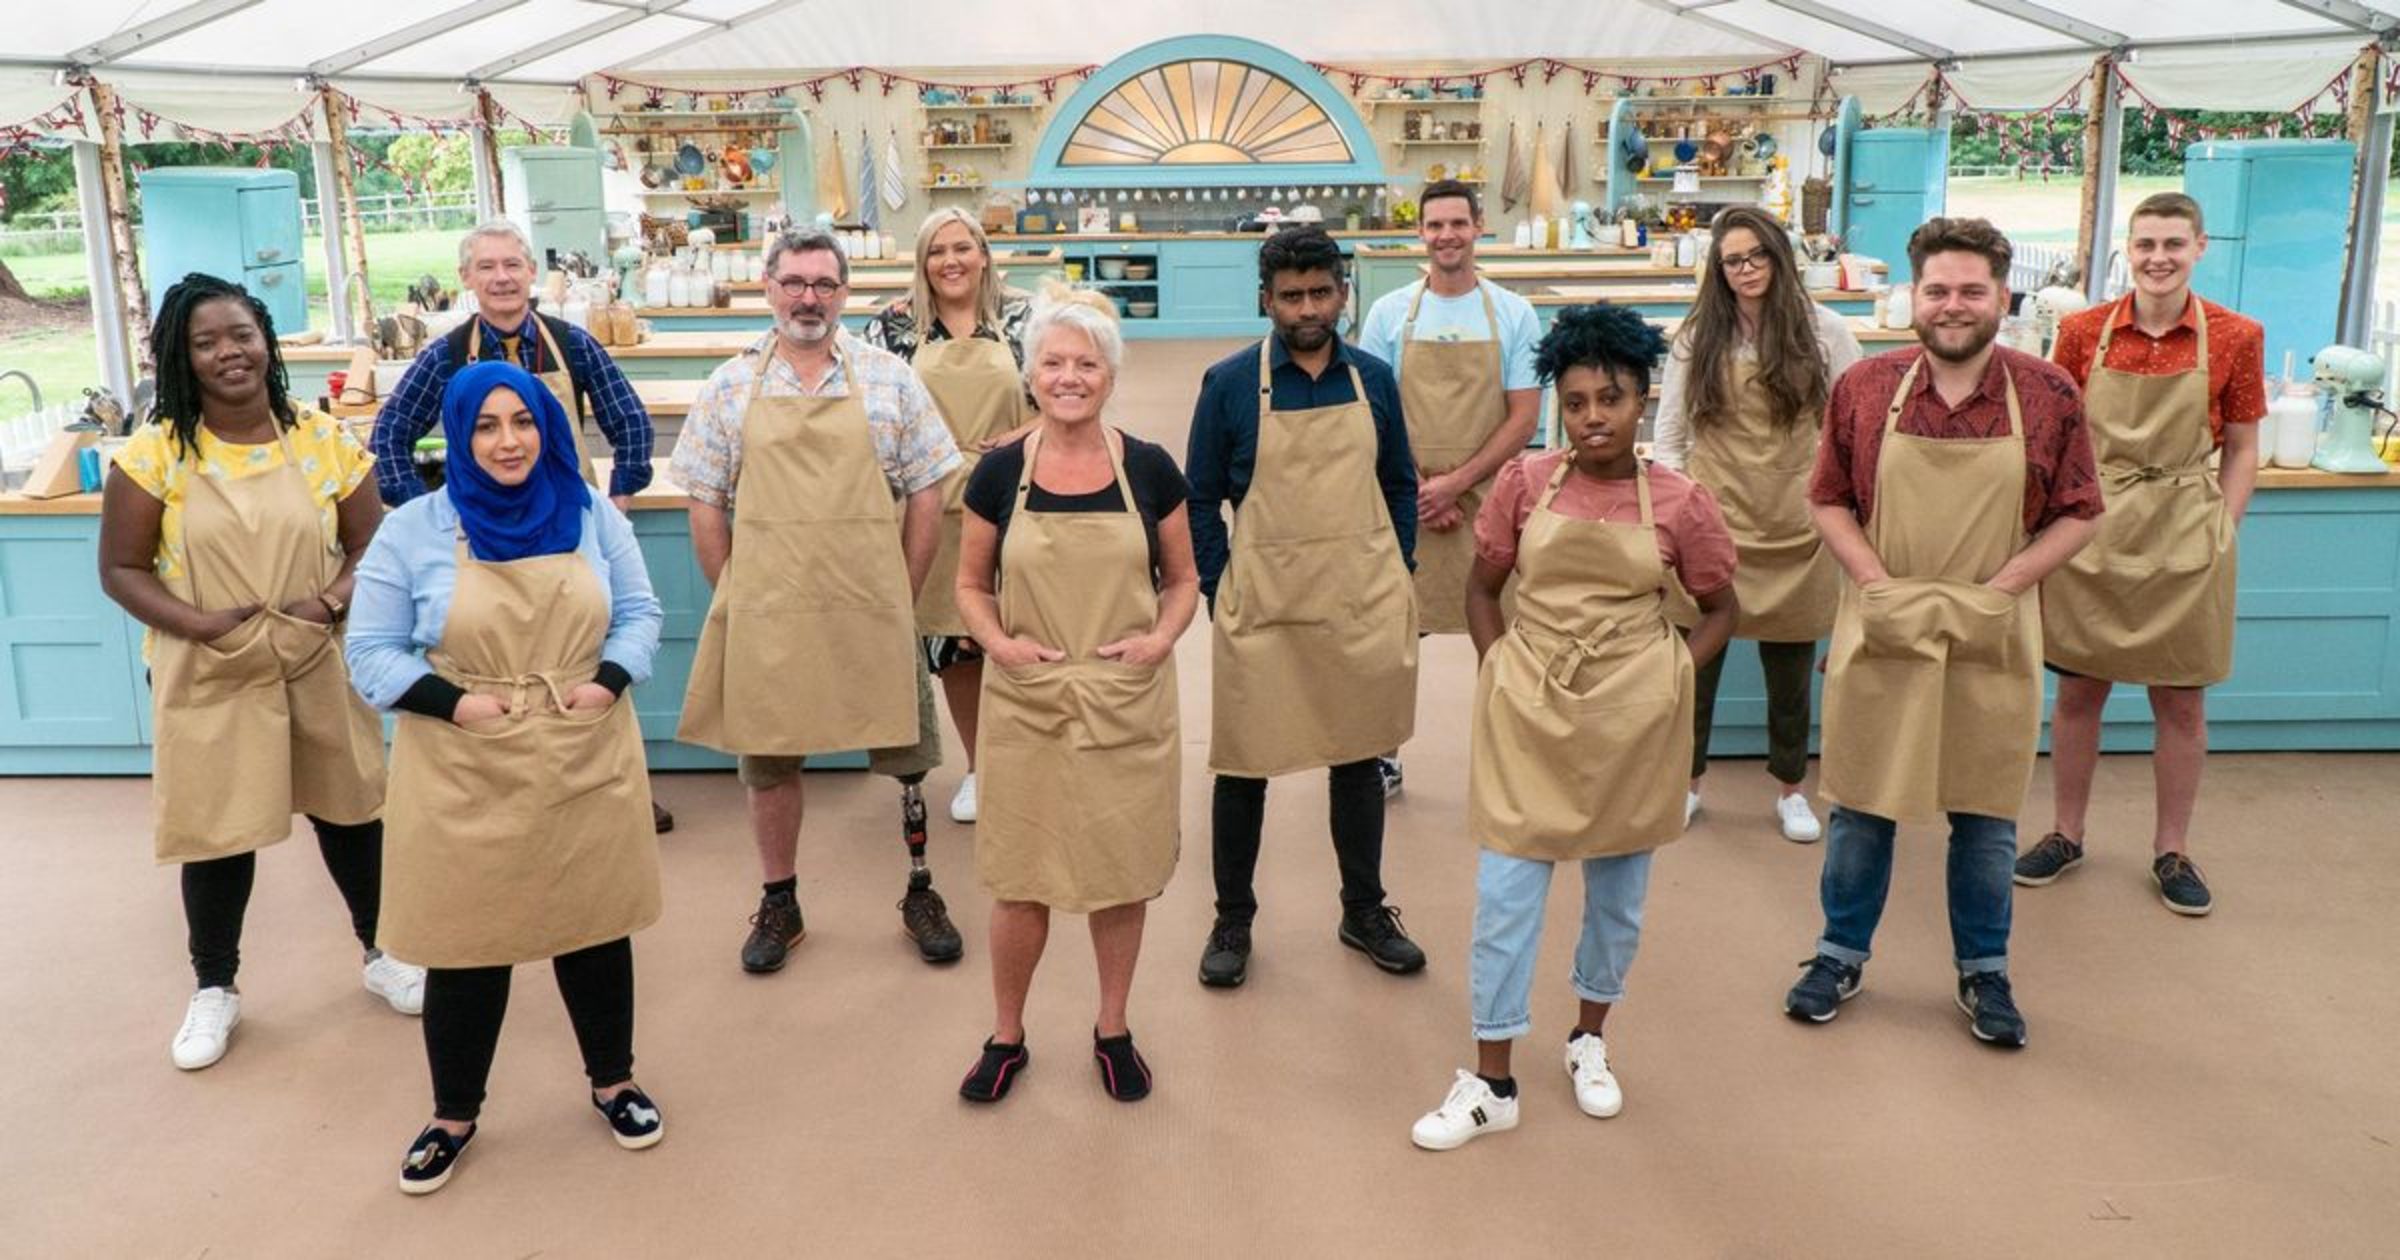 Bullying in pastry land? Latest drama from 'The Great British BakeOff' Film Daily